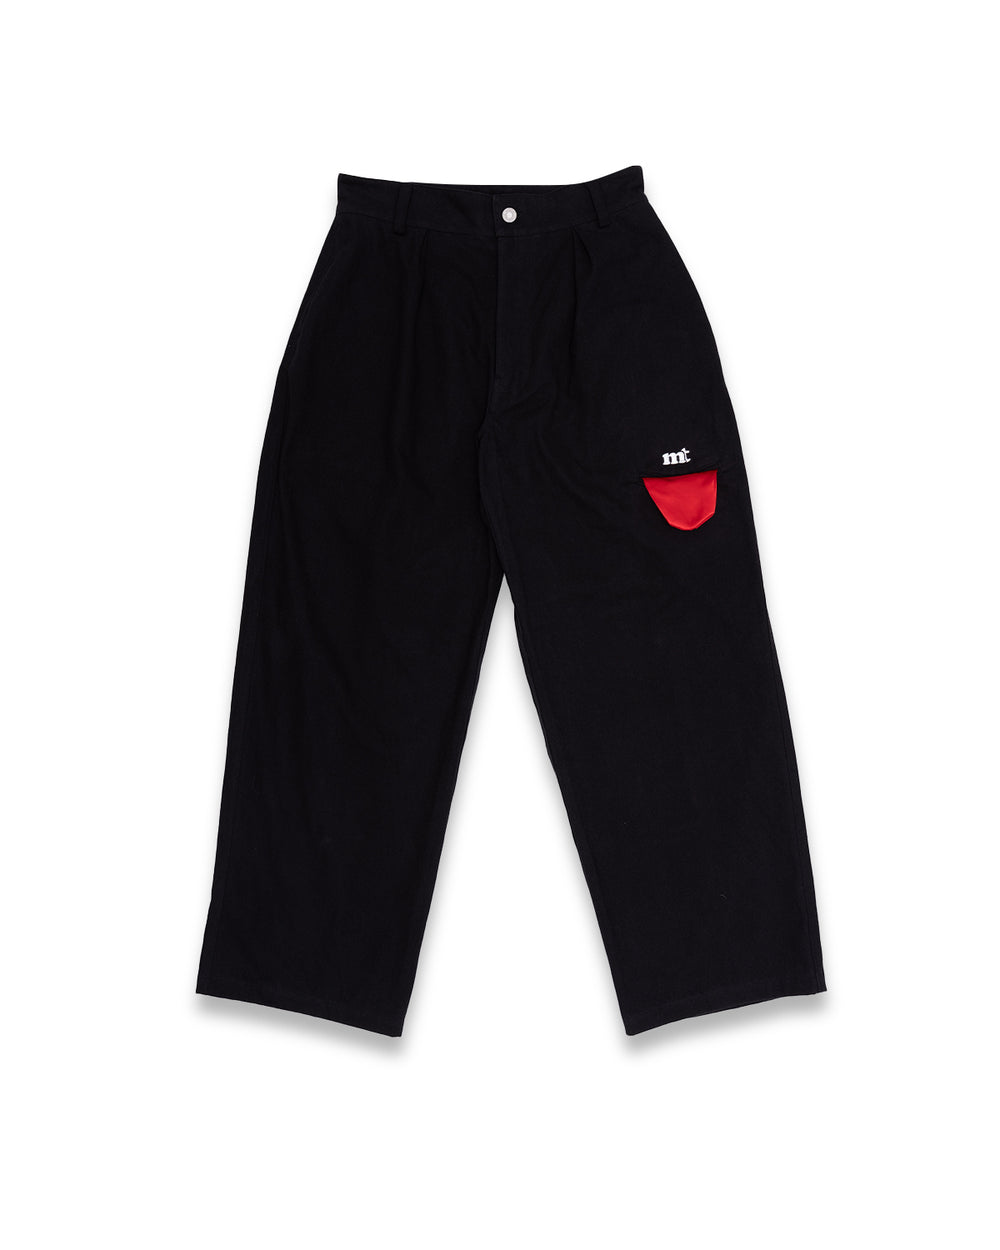 "Suns Out Tongues Out" Pant - Black